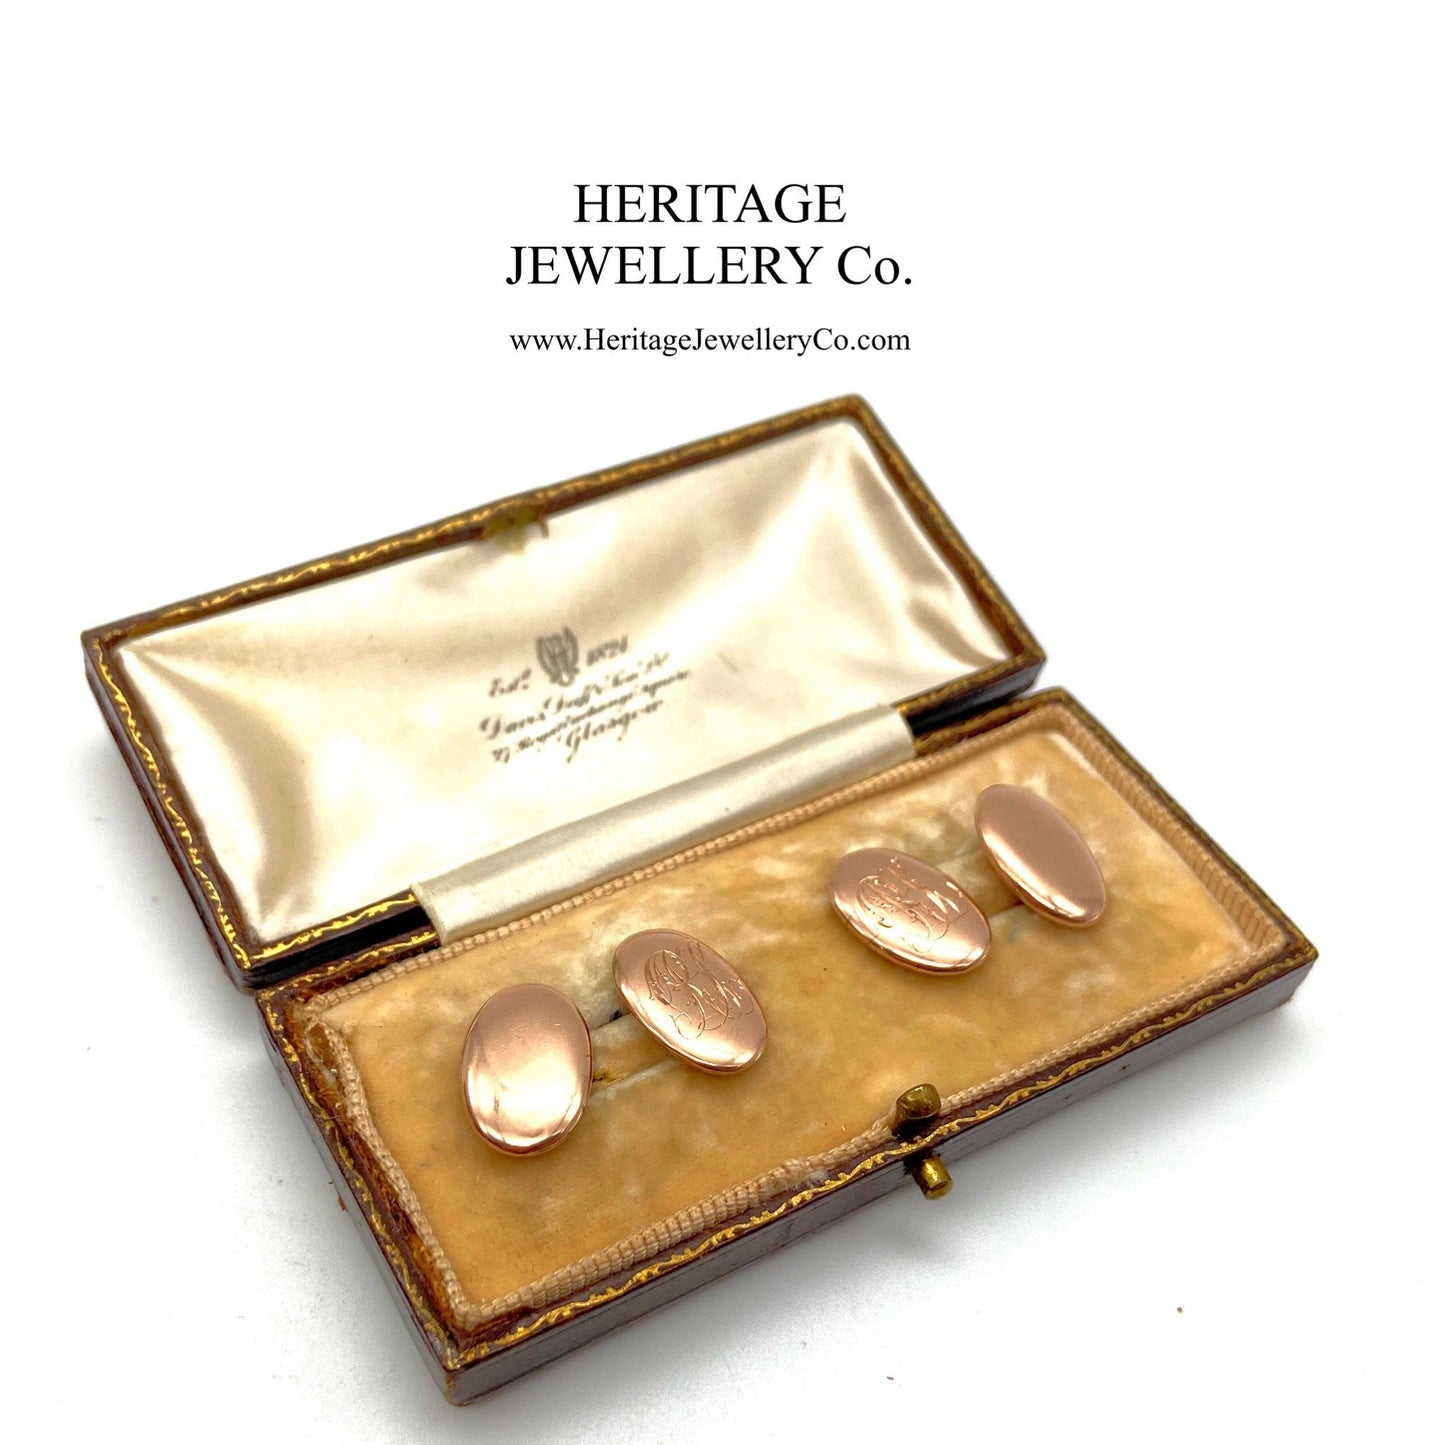 Victorian Rose Gold Cufflinks with Antique Box